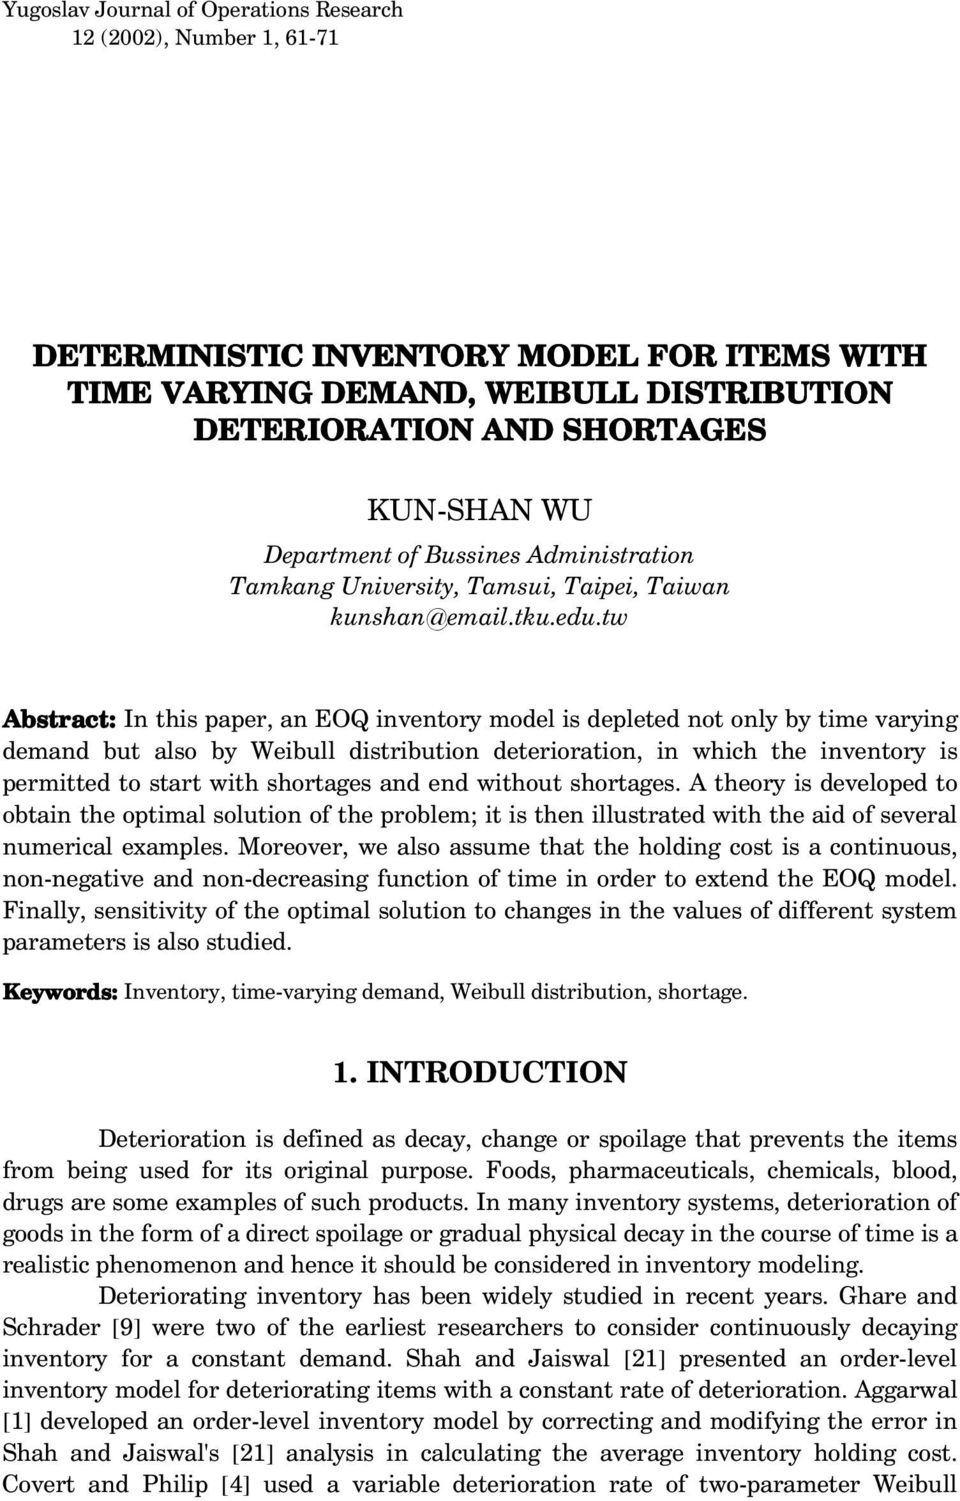 w Absrac: In his paper, an EOQ invenory model is depleed no only by ime varying demand bu also by Weibull disribuion deerioraion, in which he invenory is permied o sar wih shorages and end wihou